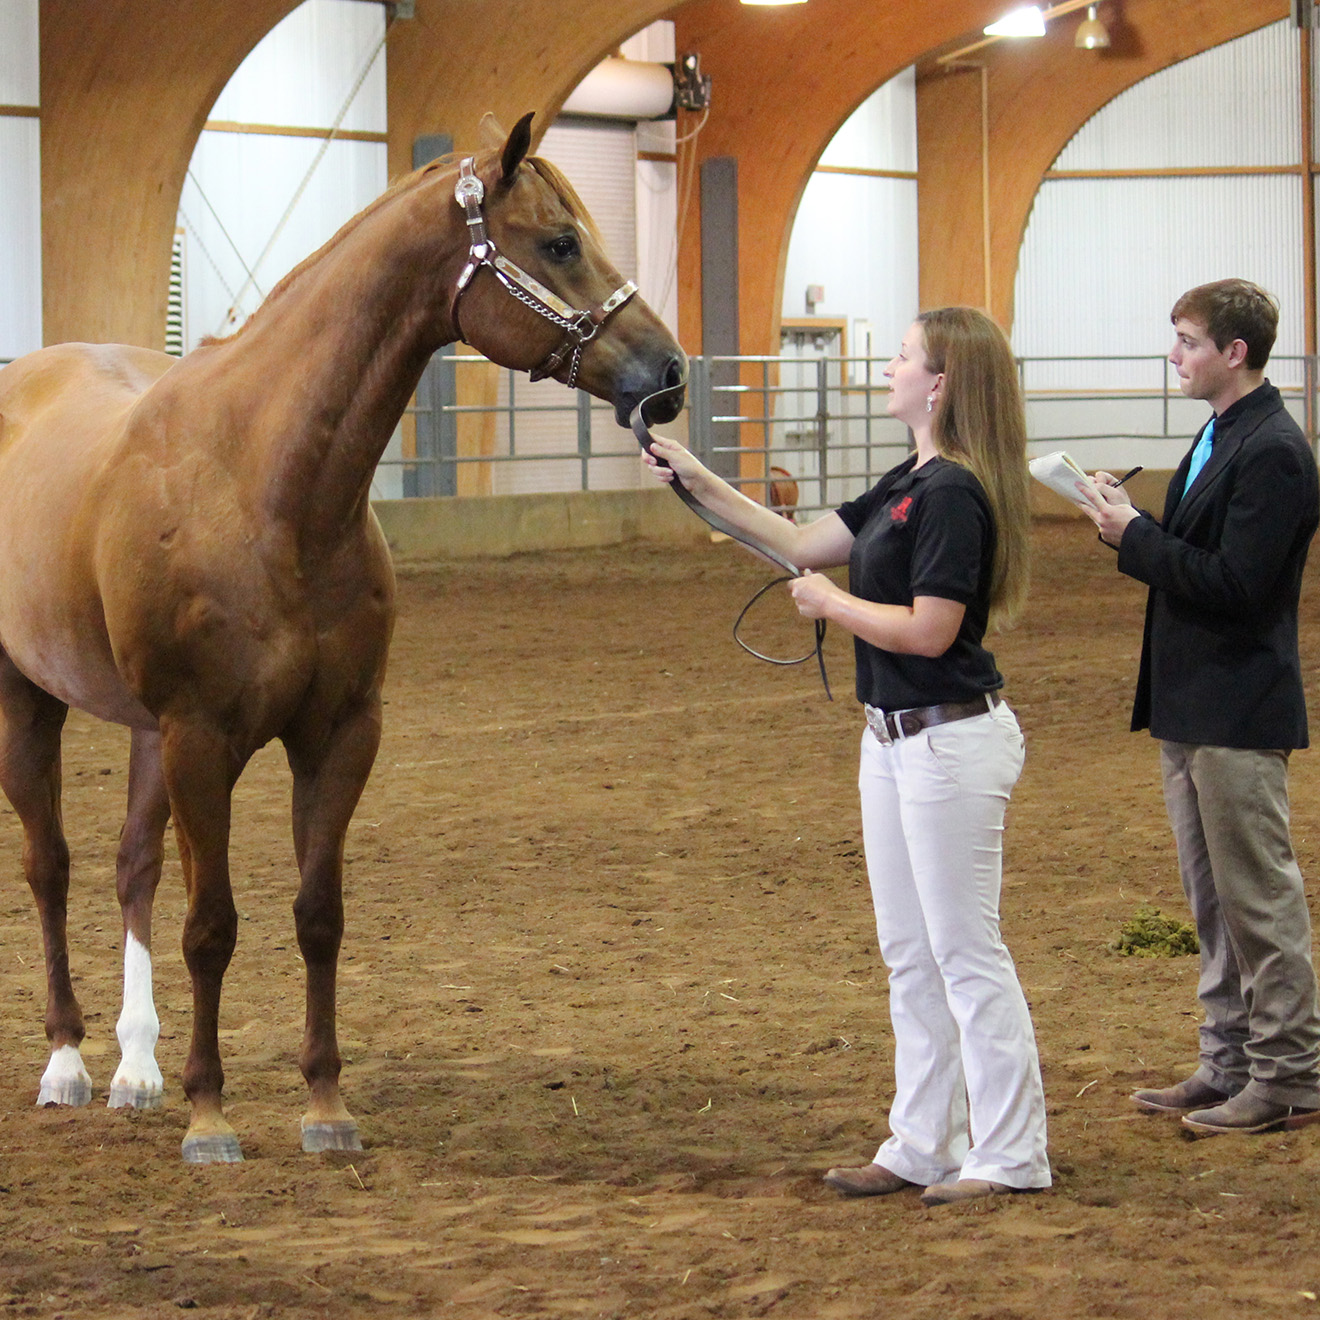 Two students and their horse prepare for judging